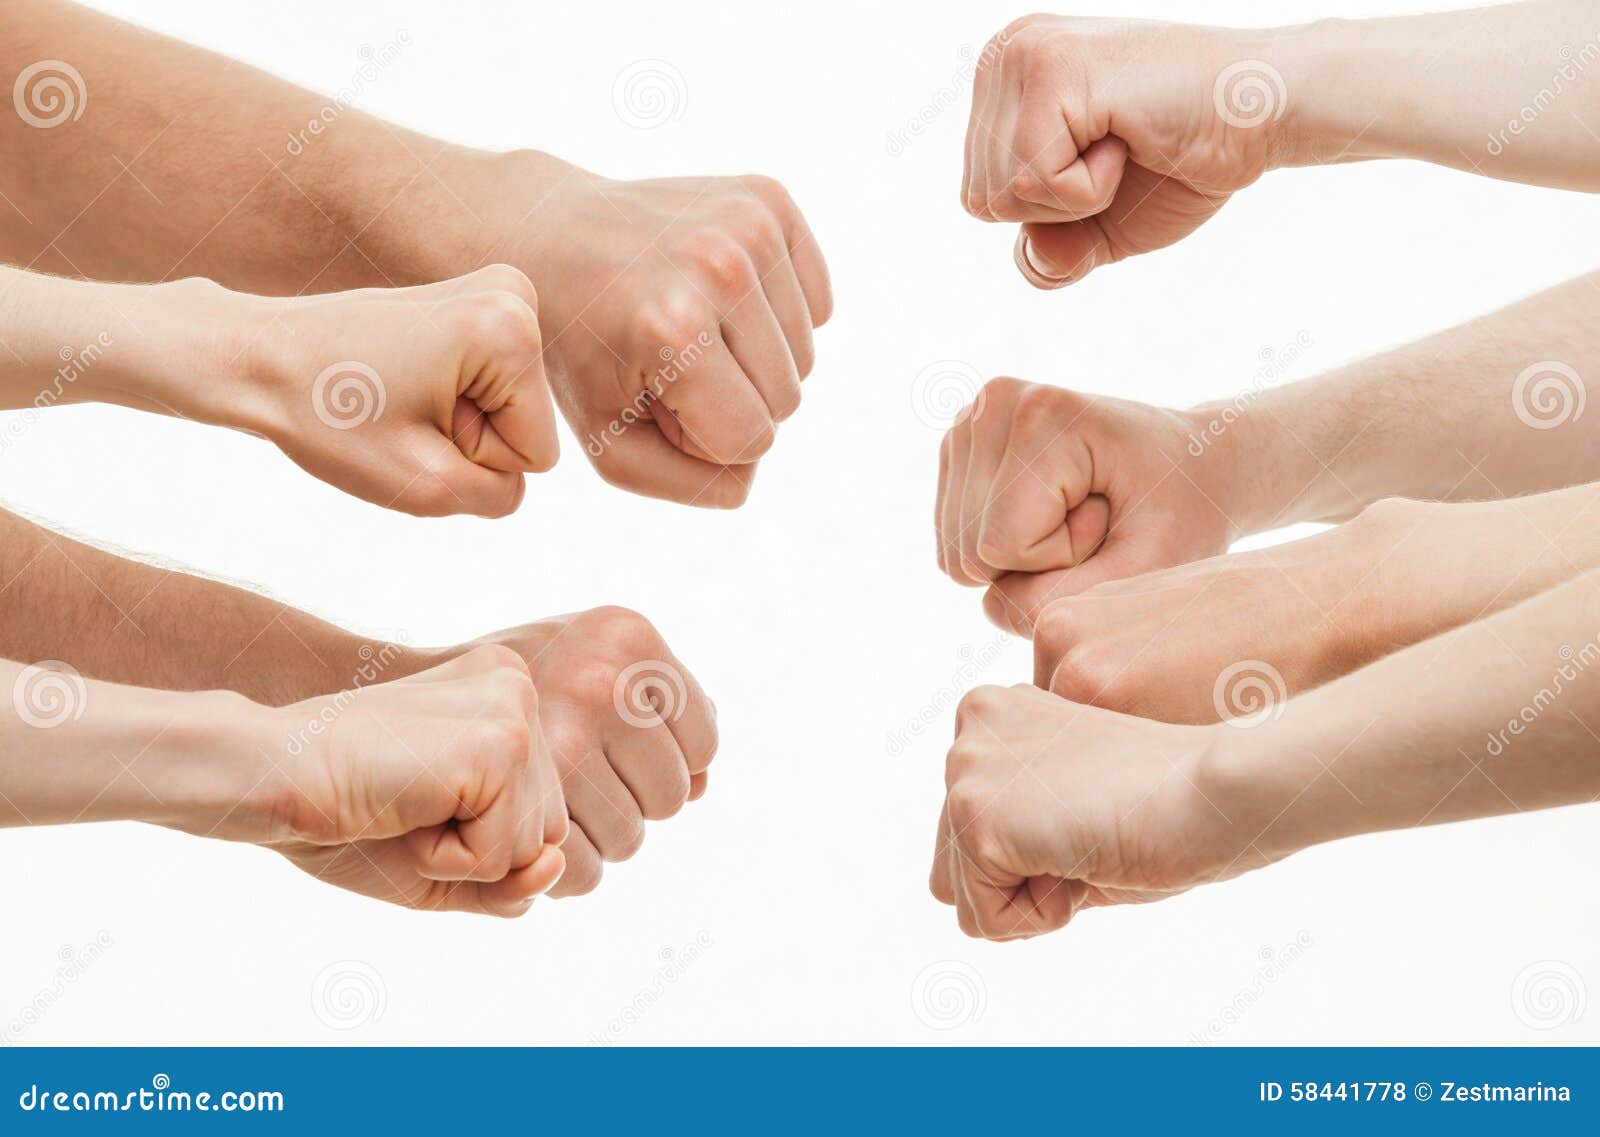 human hands demonstrating a gesture of a strife